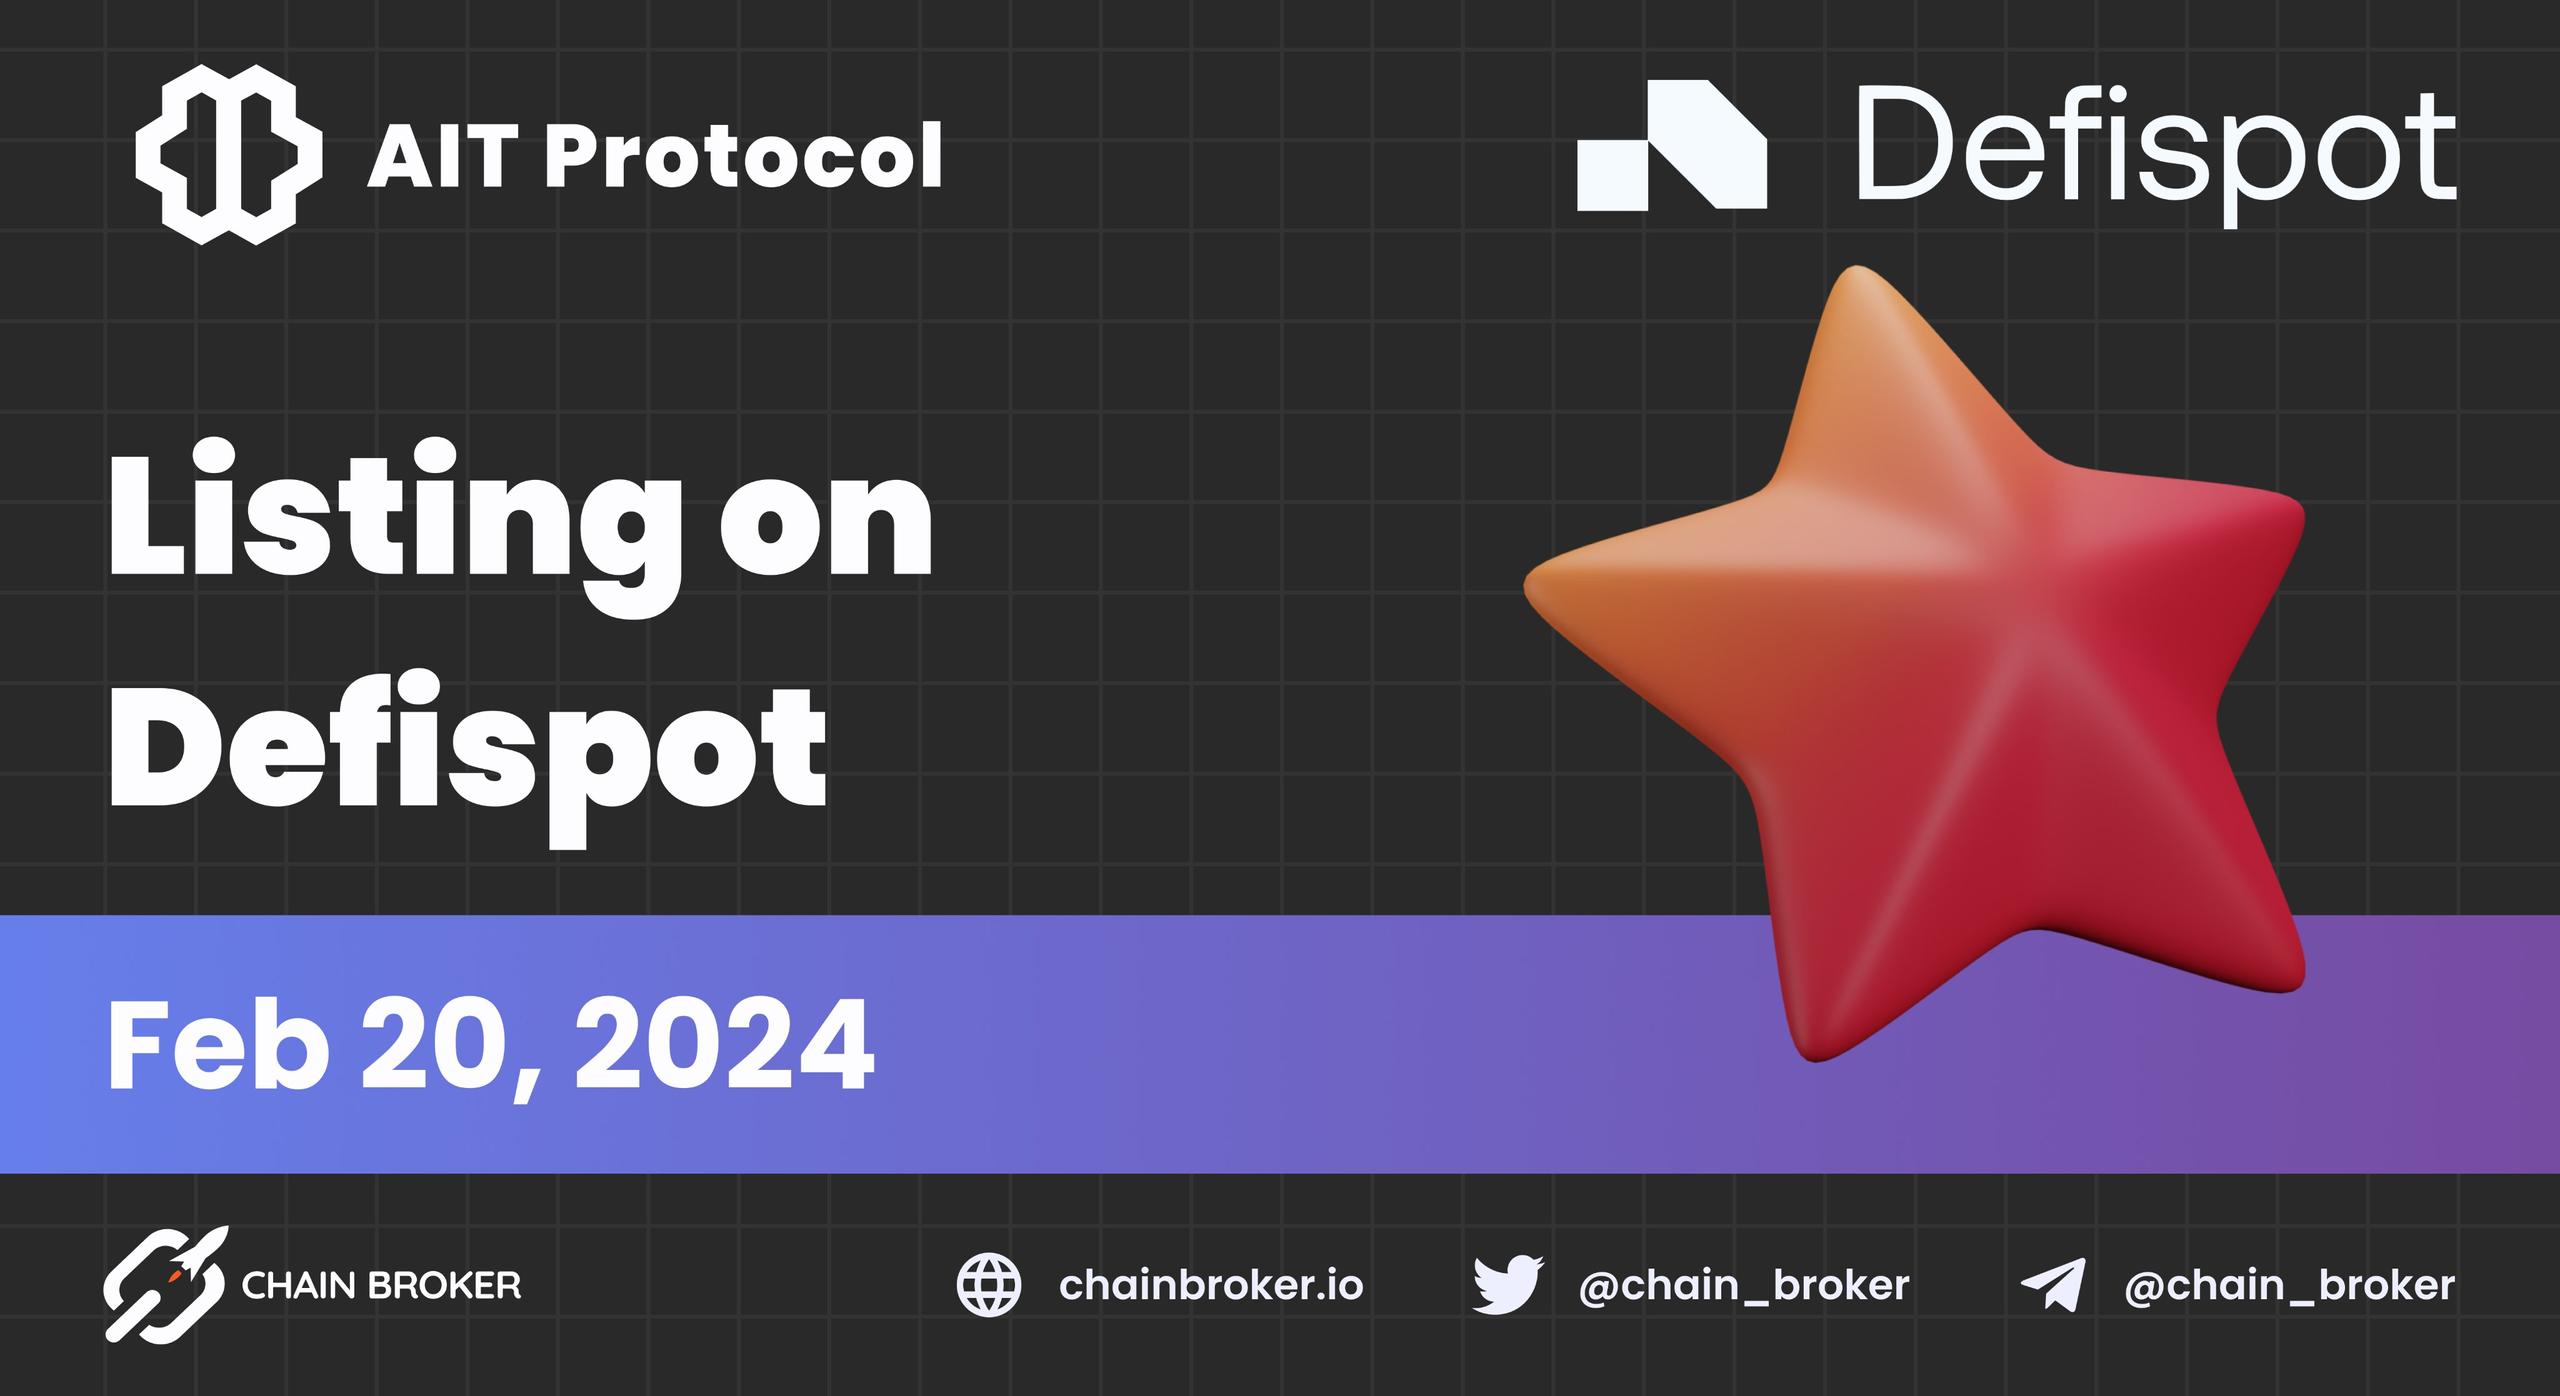 AIT Protocol has been listed on Defispot